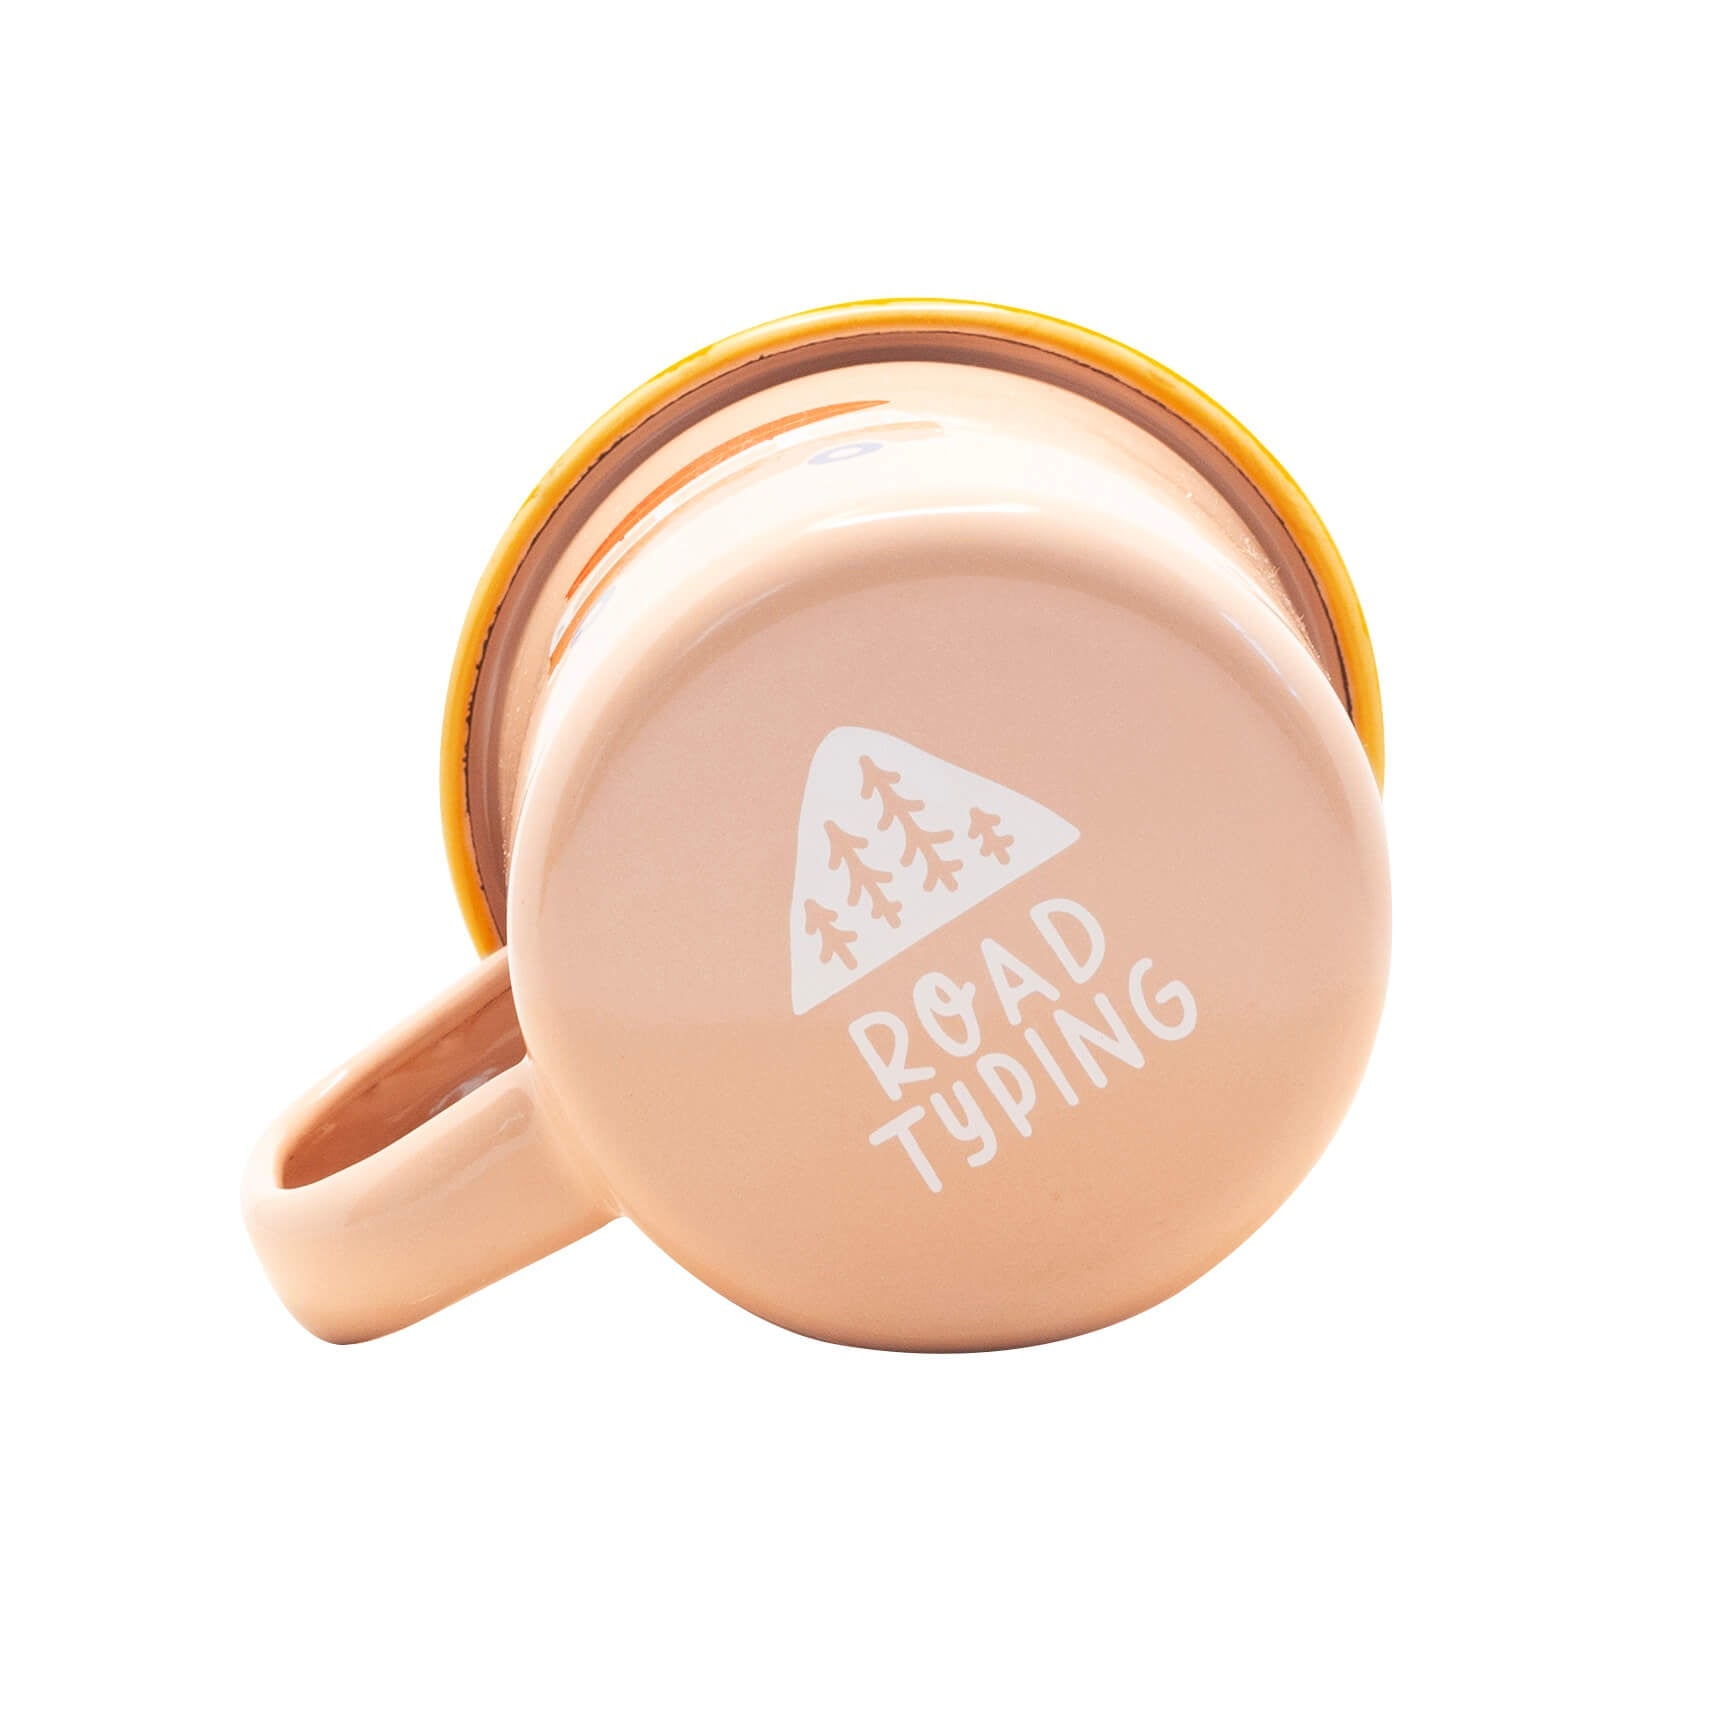 Roadtyping Kinder Emaille Becher go Camping in rosa und gelb